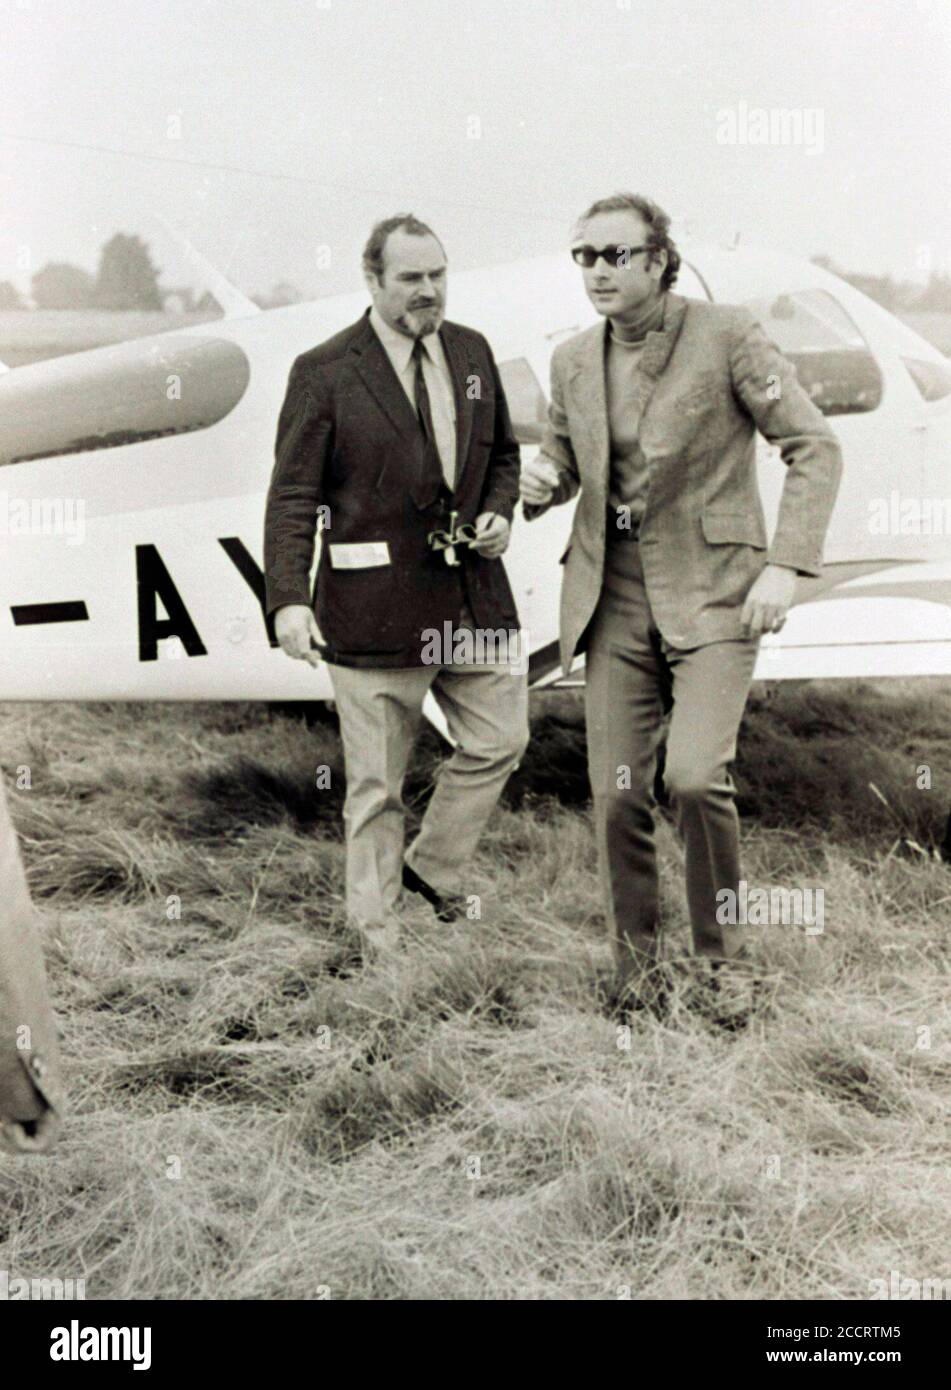 Prince William of Gloucester a member of the British Royal Family was killed with his co-pilot Vyrel Mitchell during the Goodyear Air race at Halfpenny Green airfield at Bobbington, near Wolverhampton in the West Midlands of England on Bank Holiday Monday 28th August 1972. Pics by Ray Bradbury. Stock Photo